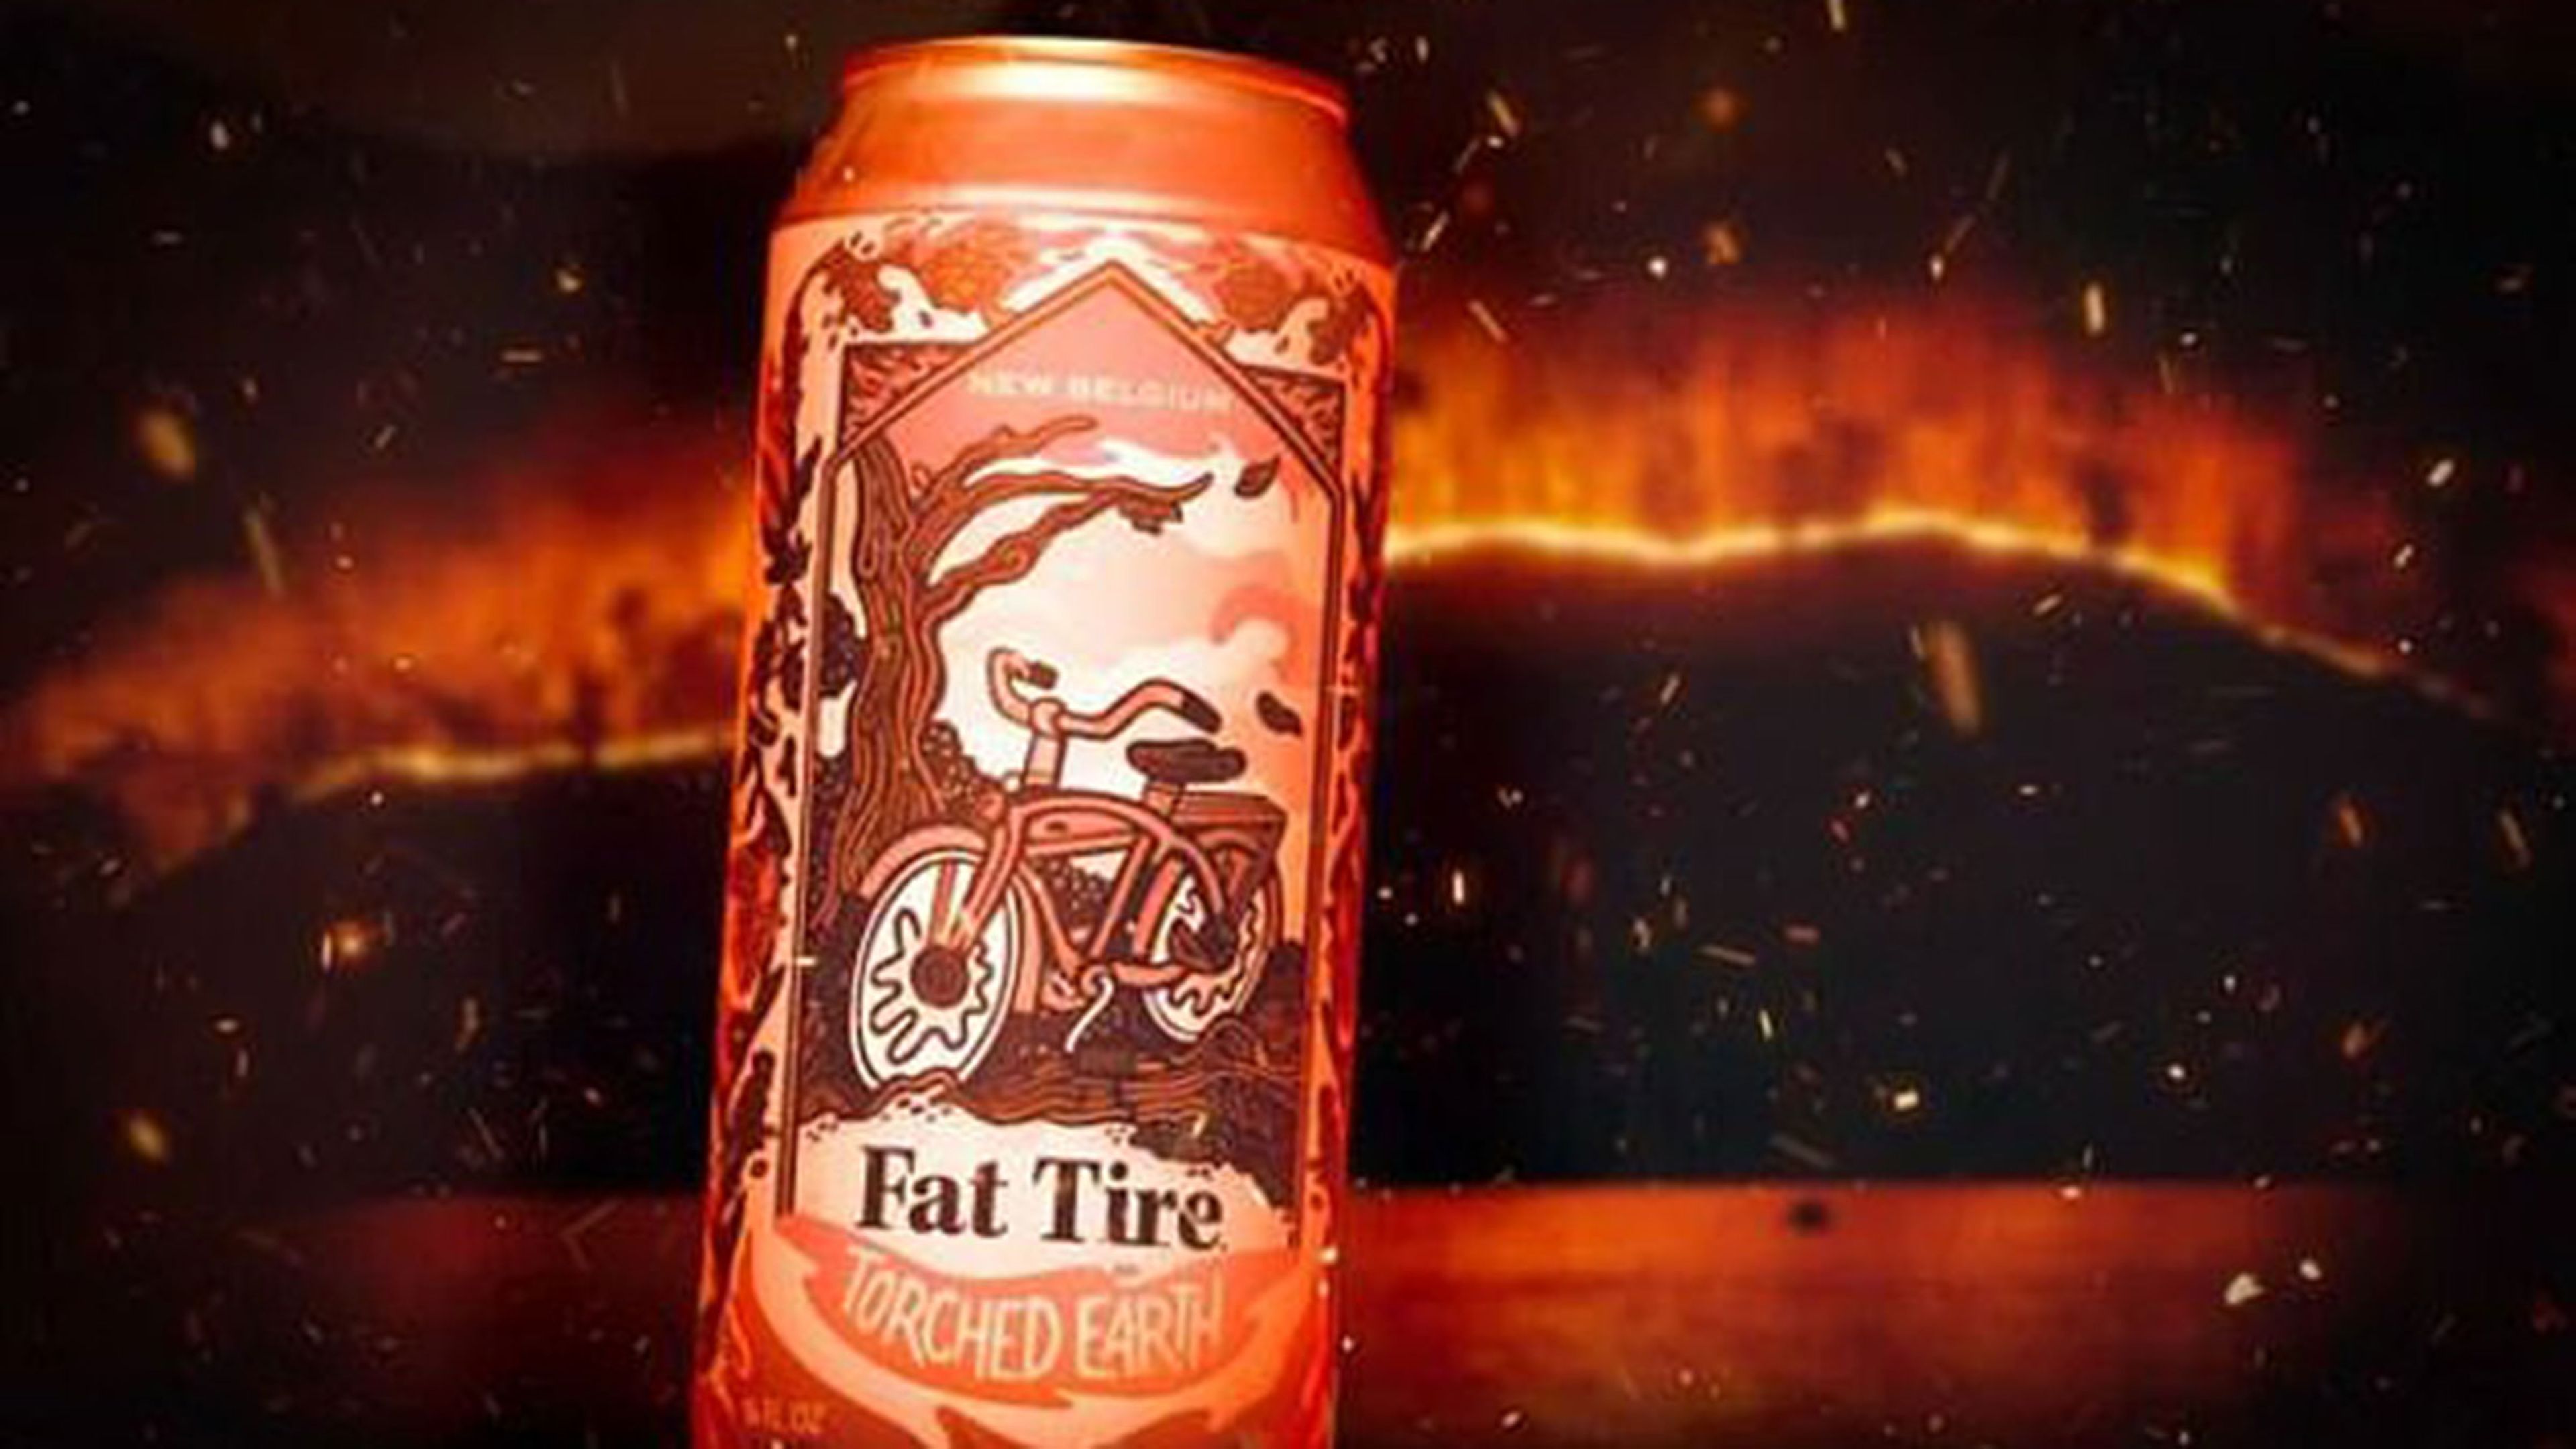 Fat Tire Torched Earth Ale